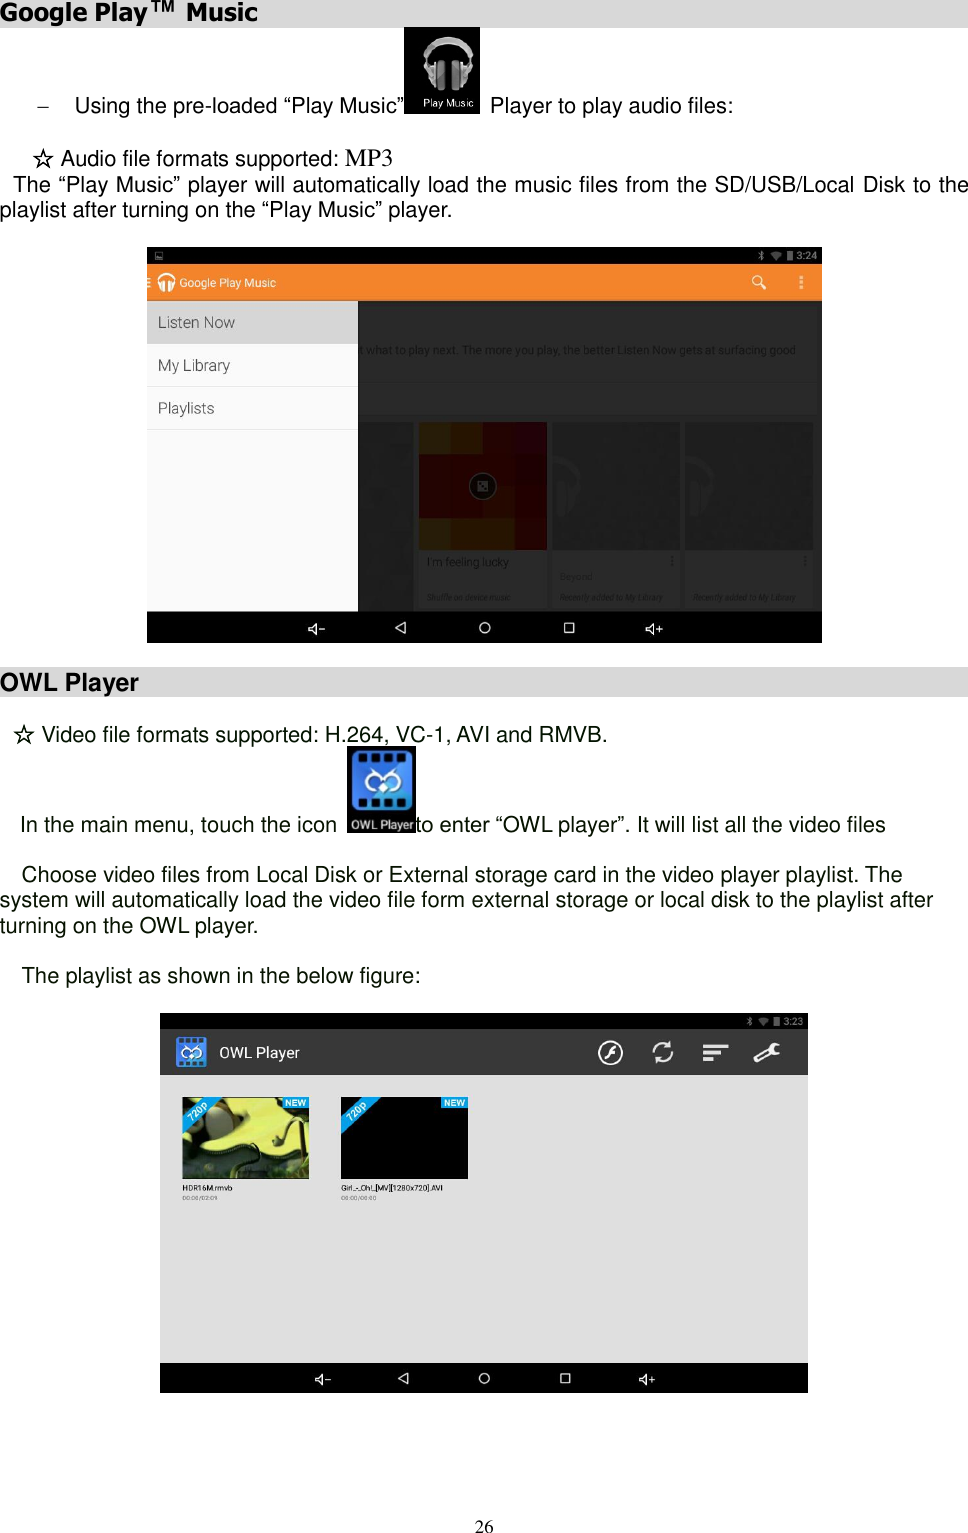  26  Google Play™ Music                                                           Using the pre-loaded “Play Music”   Player to play audio files:   ☆ Audio file formats supported: MP3 The “Play Music” player will automatically load the music files from the SD/USB/Local Disk to the playlist after turning on the “Play Music” player.     OWL Player                                                                             ☆ Video file formats supported: H.264, VC-1, AVI and RMVB. In the main menu, touch the icon  to enter “OWL player”. It will list all the video files    Choose video files from Local Disk or External storage card in the video player playlist. The system will automatically load the video file form external storage or local disk to the playlist after turning on the OWL player.    The playlist as shown in the below figure:     